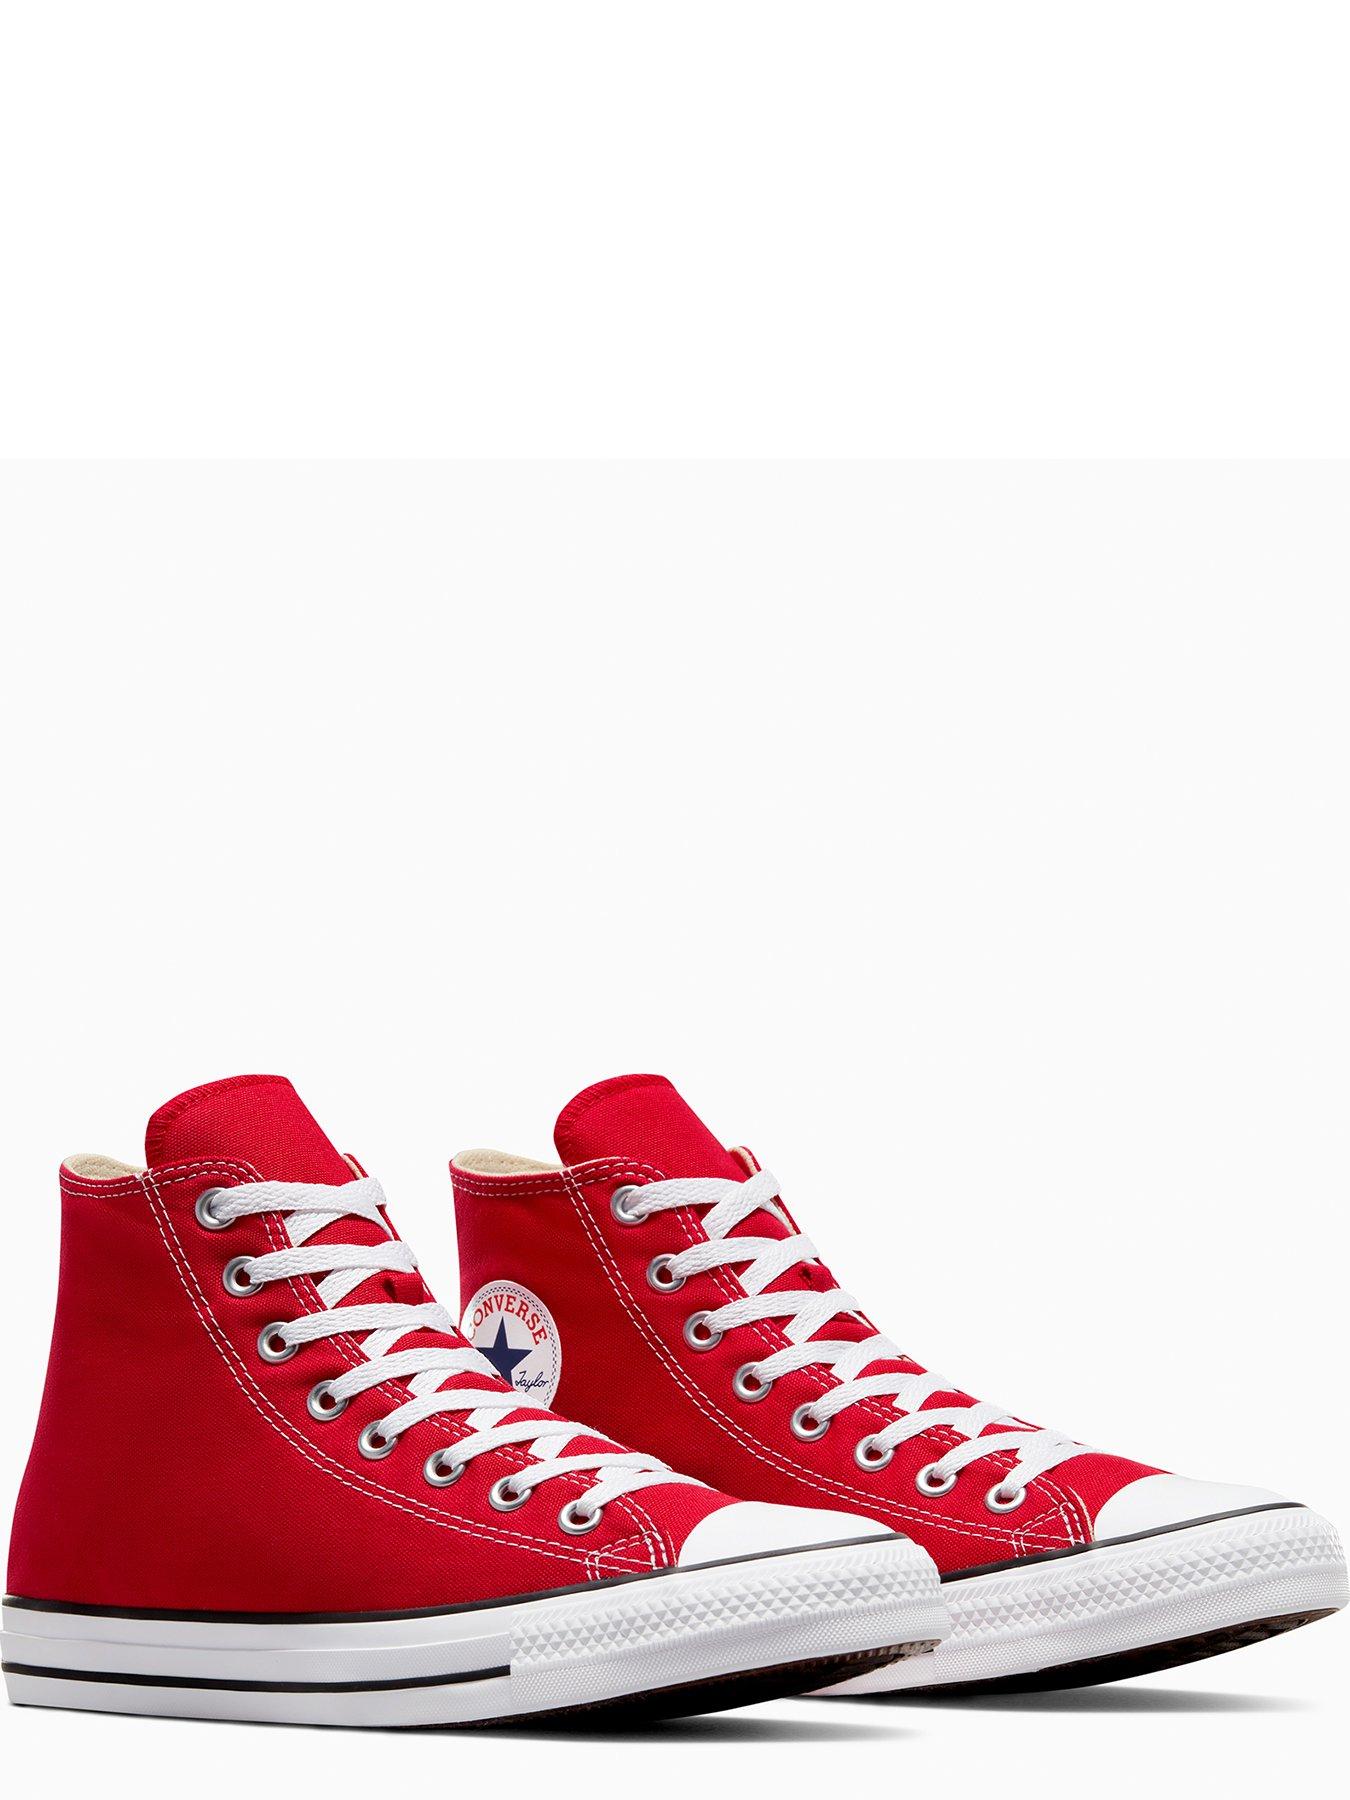 Converse Unisex Hi Top Trainers - Red | Very.co.uk